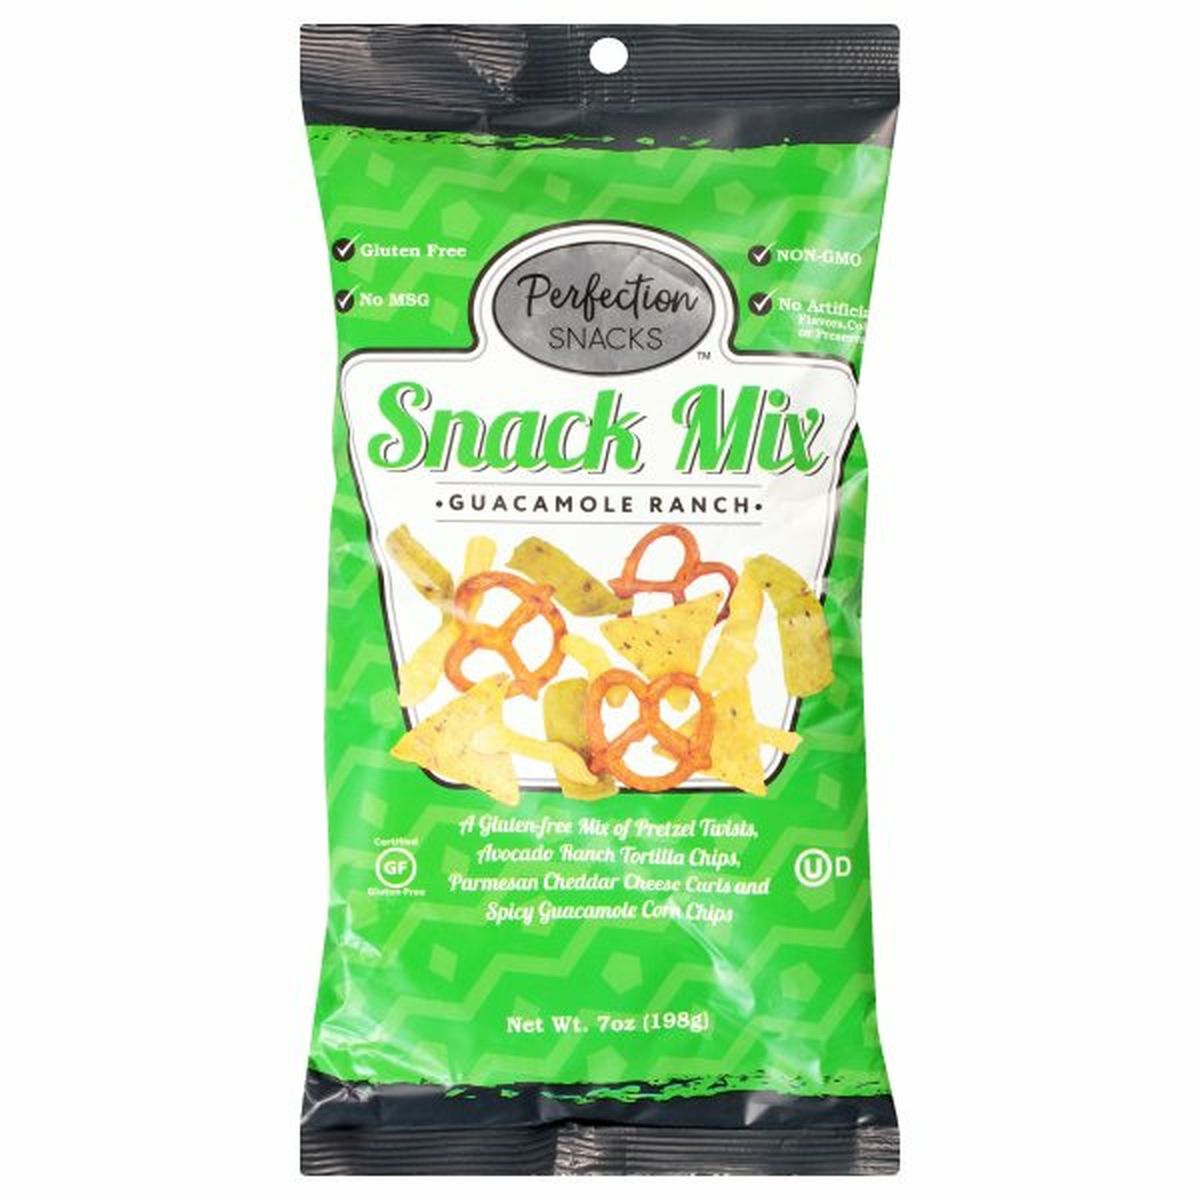 Calories in Perfection Snacks Snack Mix, Guacamole Ranch